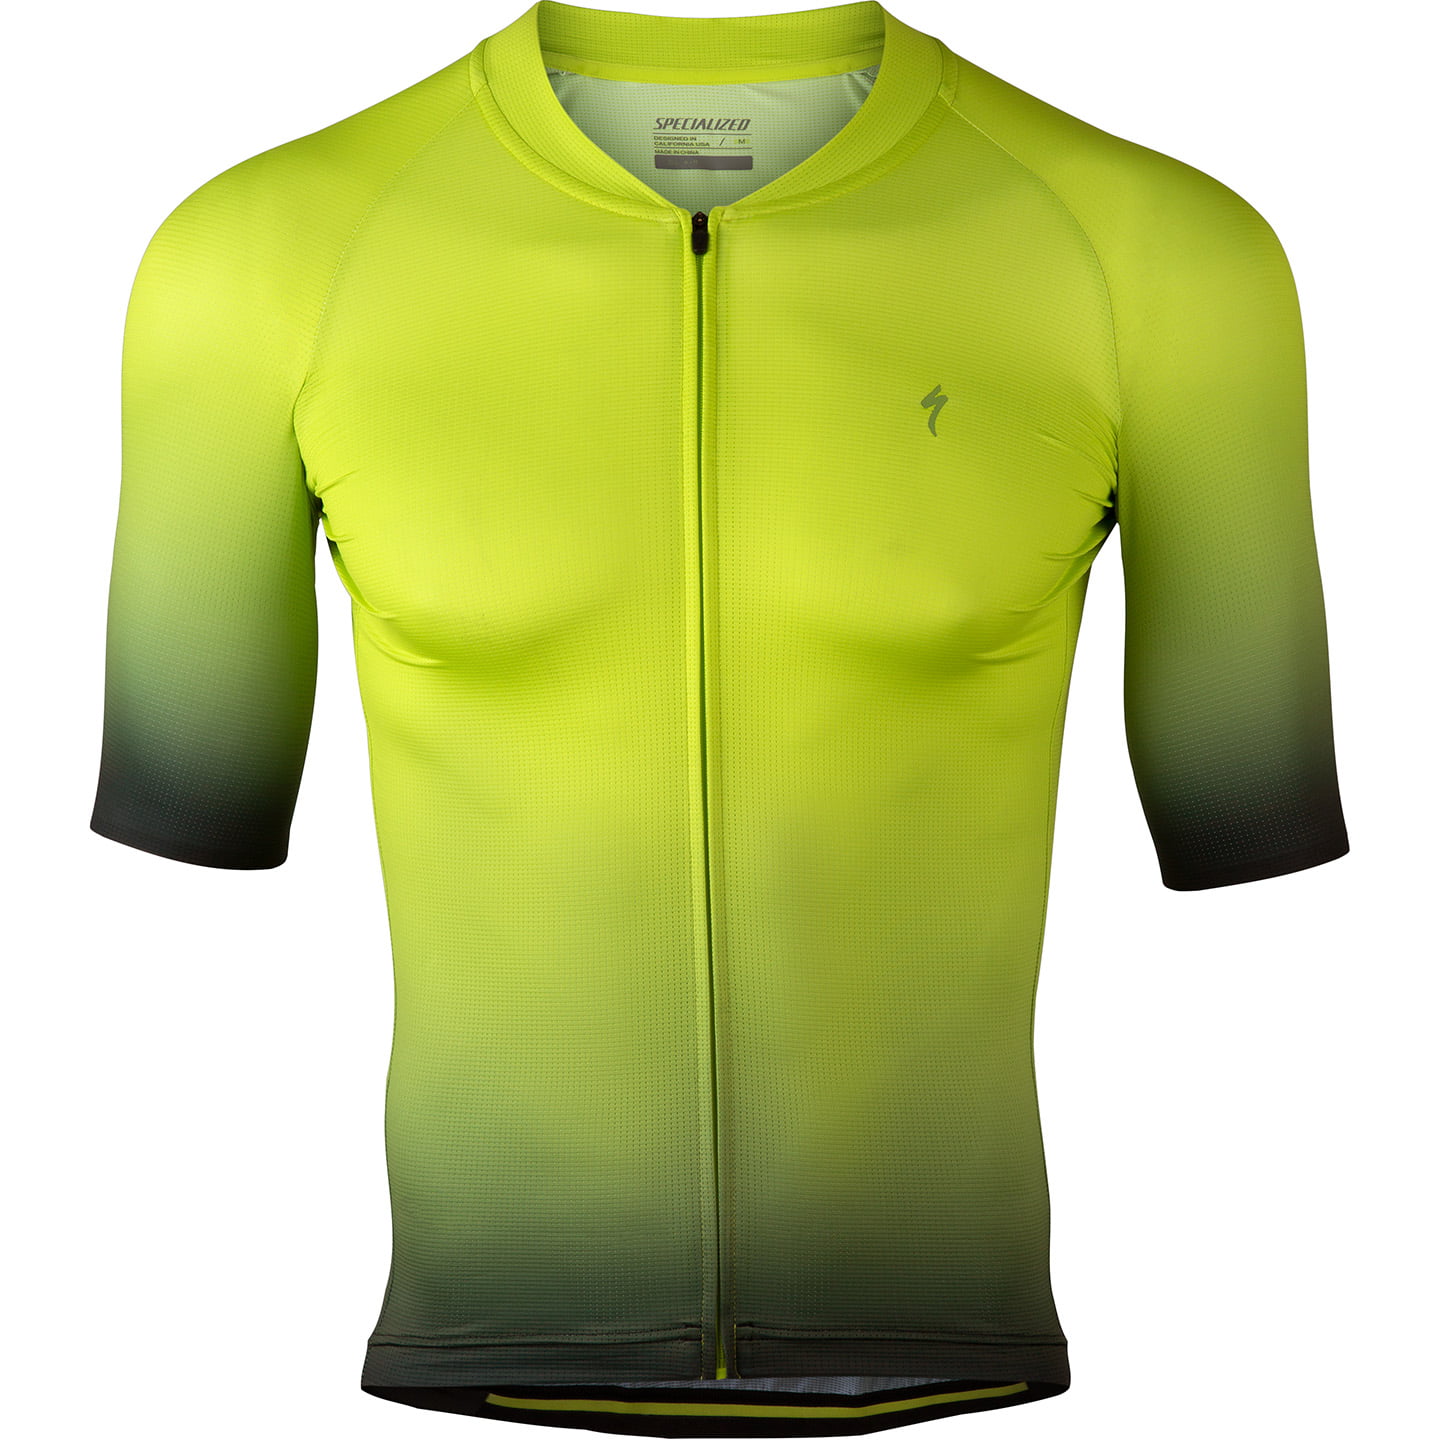 SPECIALIZED Hyprviz SL Air Short Sleeve Jersey, for men, size S, Cycling jersey, Cycling clothing